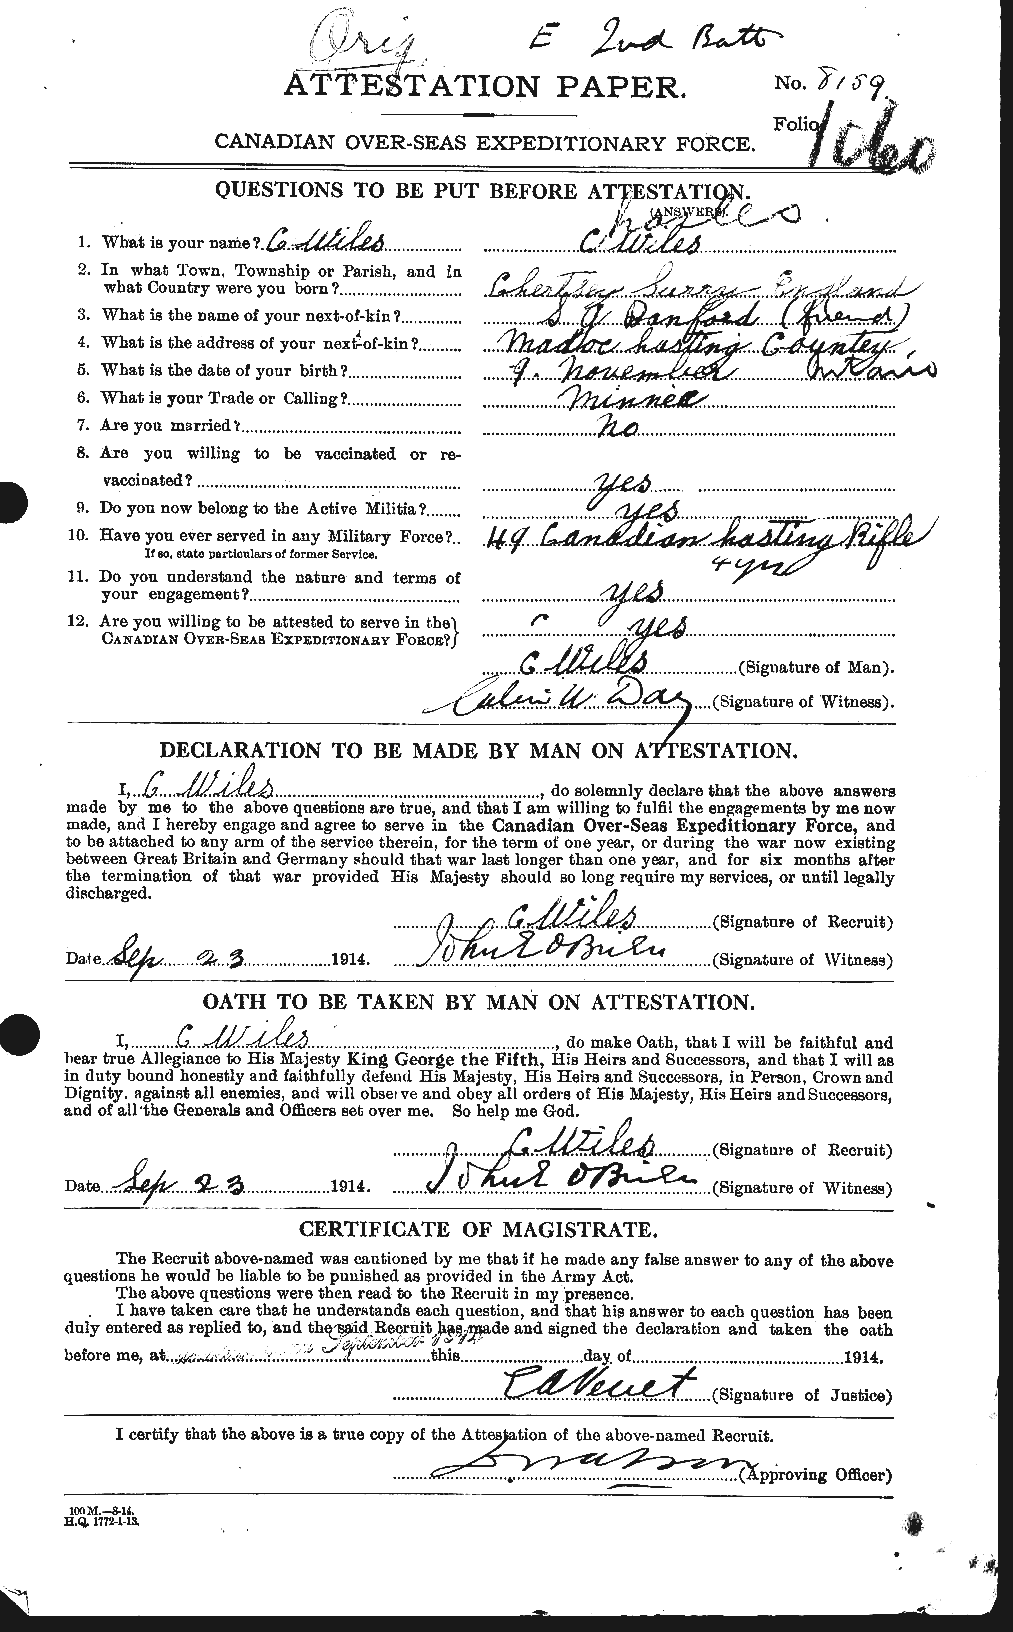 Personnel Records of the First World War - CEF 680181a